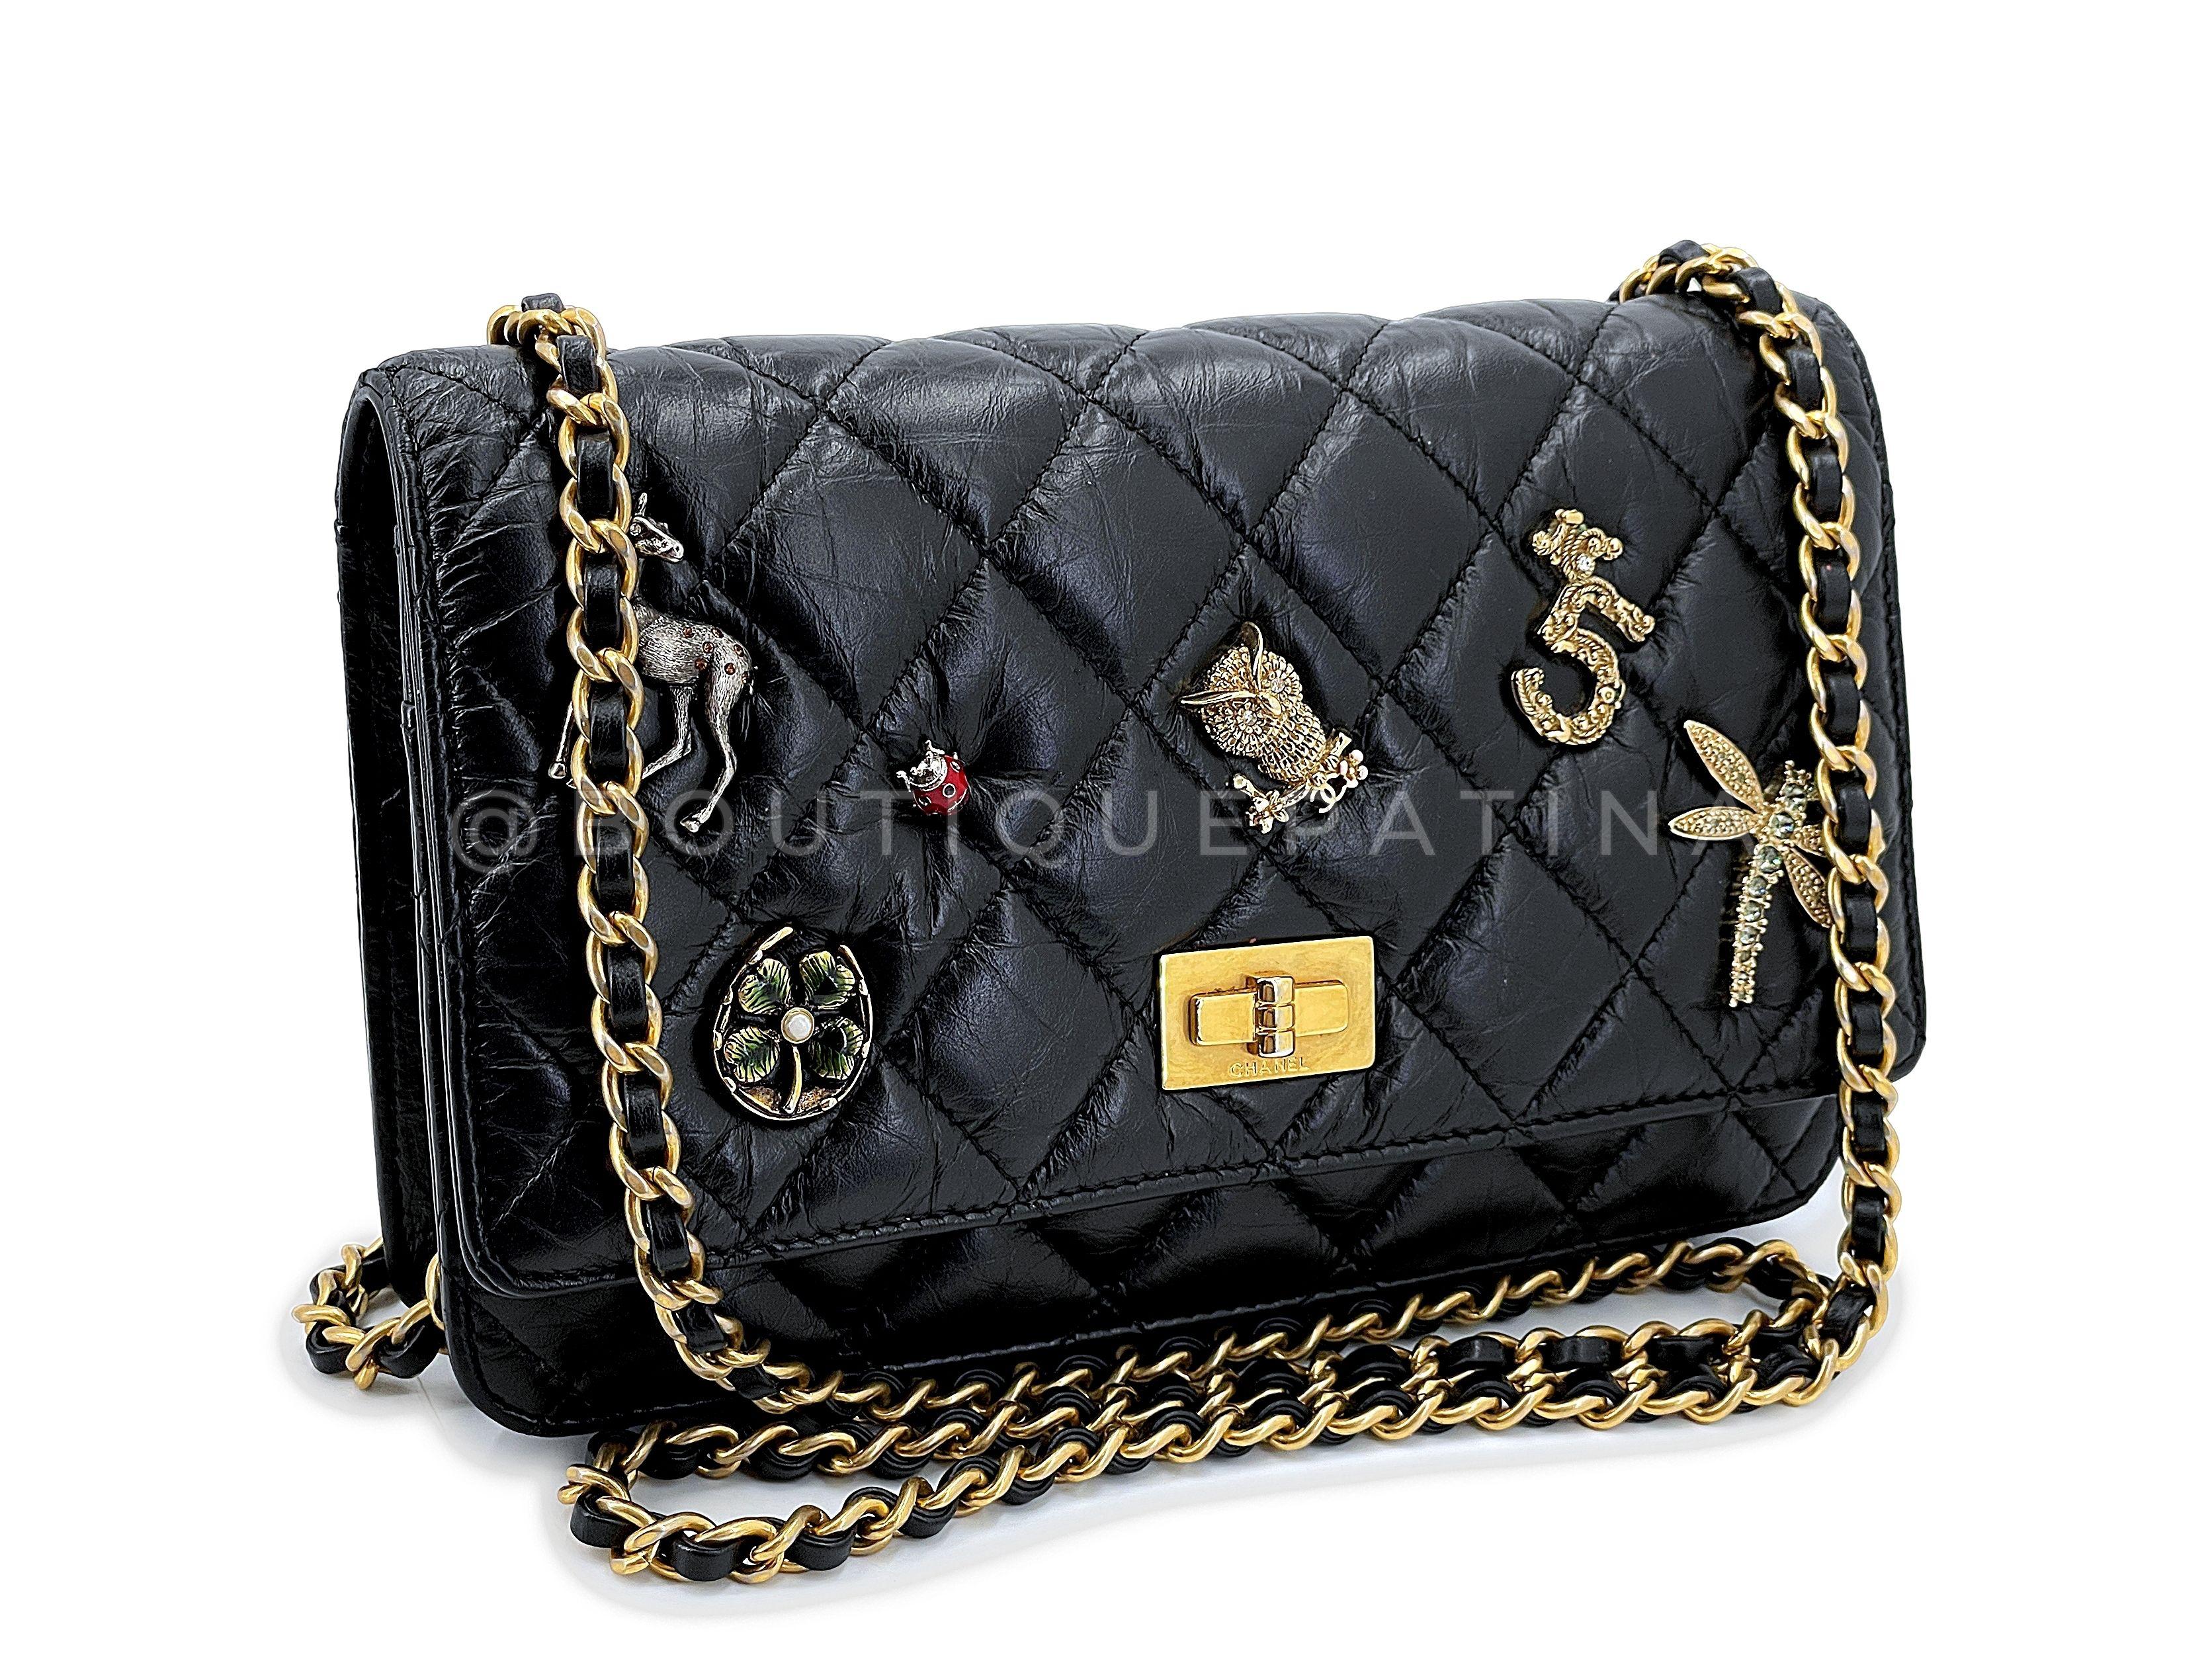 Store item: 67604
A very special release for one of our favorite versatile Chanel models. 

The WOC is a must-have Chanel, due to its chic style and extreme versatility. The long woven antiquated gold chain can be worn single across the body, double